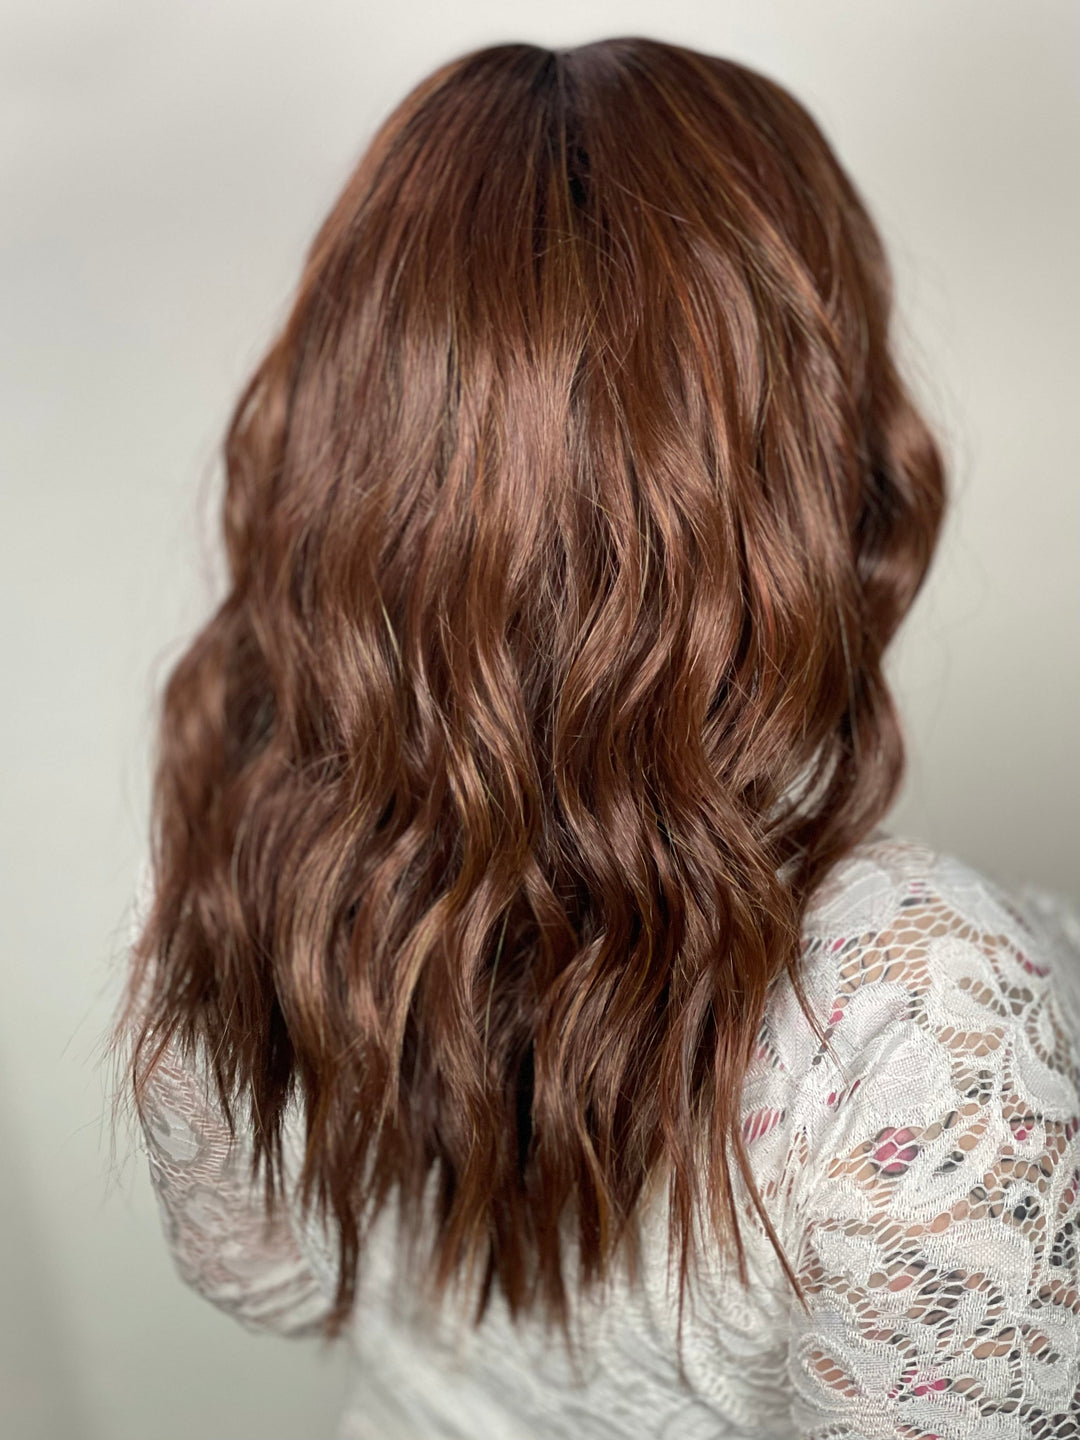 Styles-By-Soma LUXURY WIG RUSH HOUR (LUXE) - Hazelnut